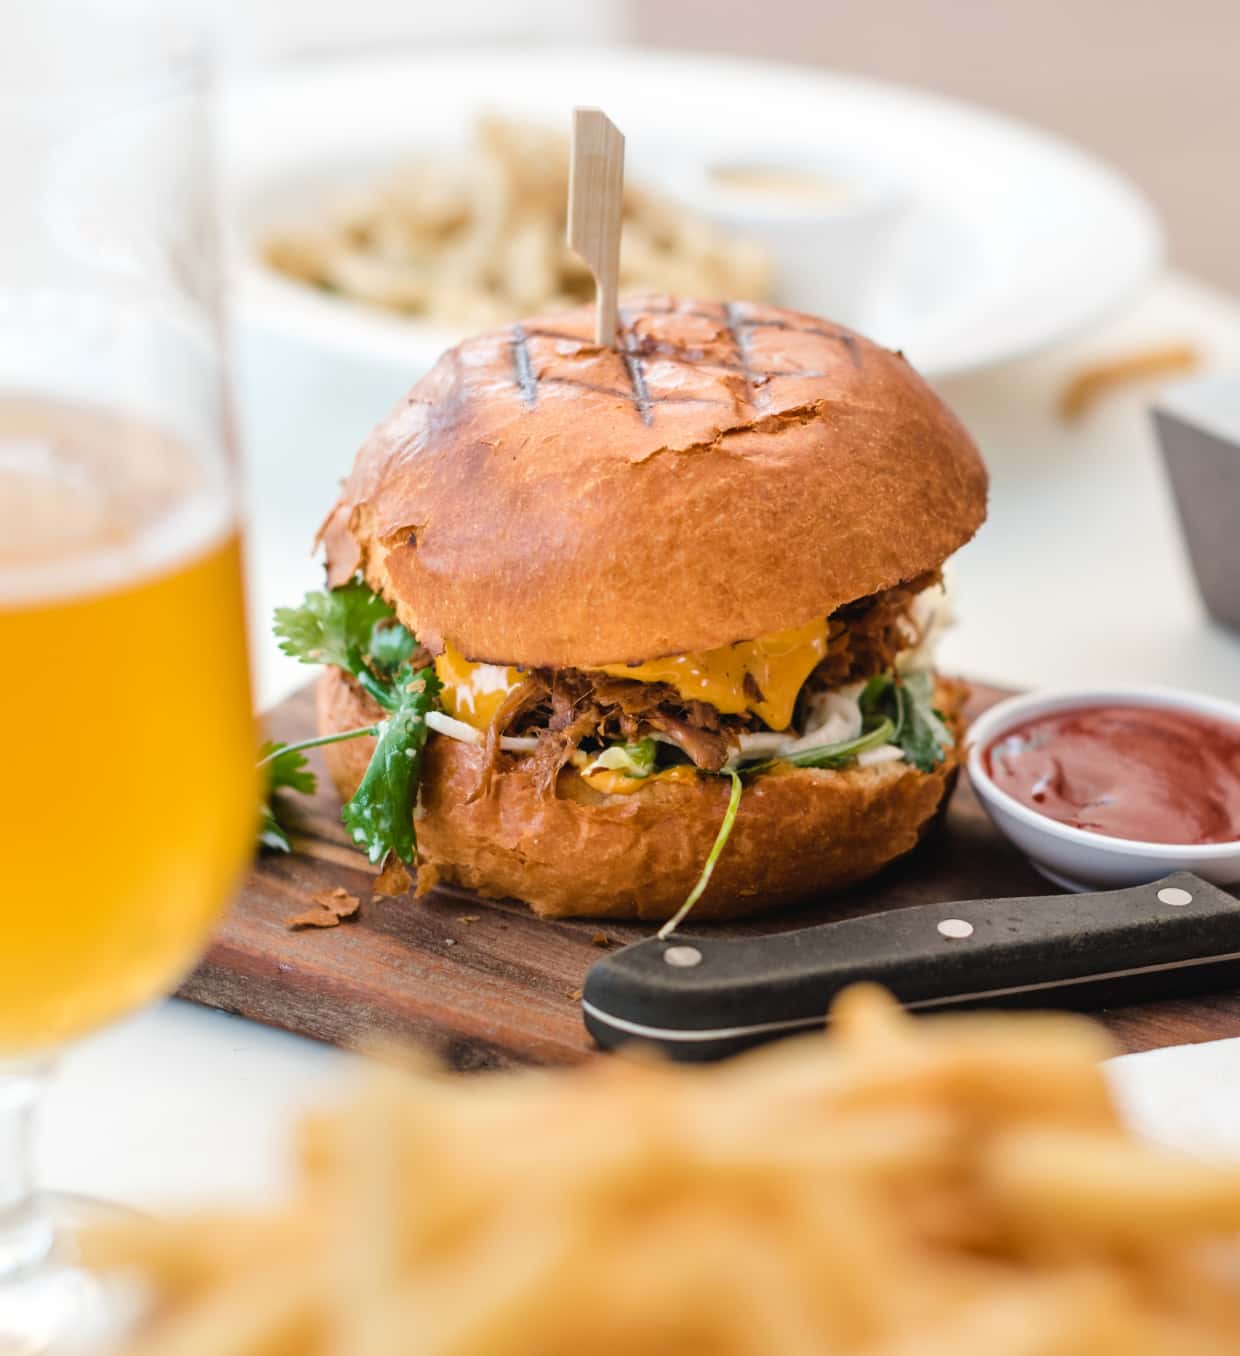 A gourmet burger with a skewer on a wooden board, served with fries, ketchup, and a glass of beer in the background, suggesting a casual dining experience.